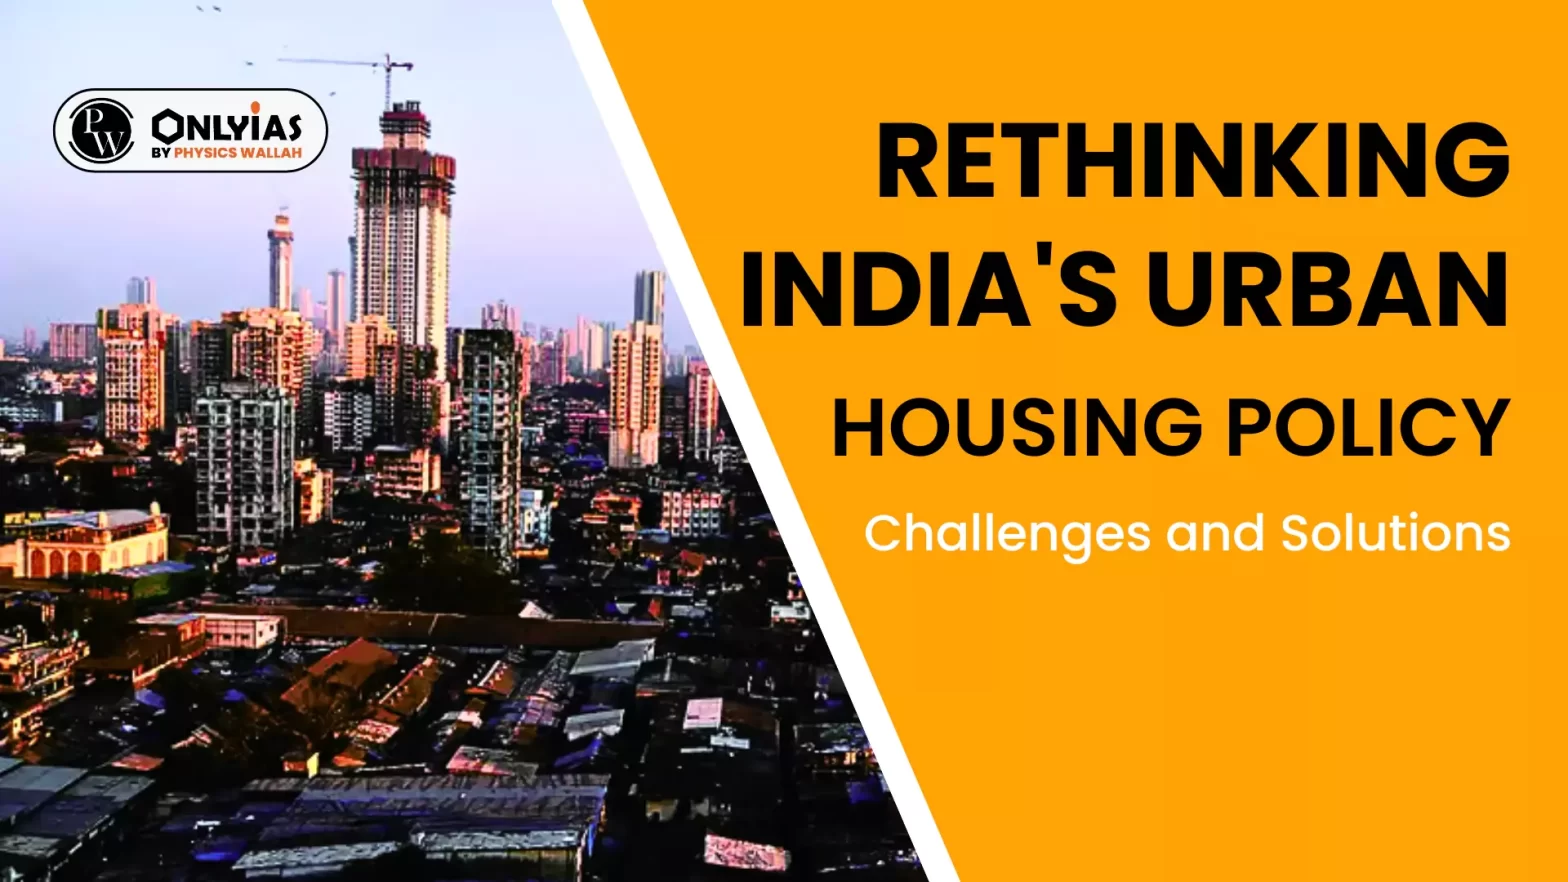 Rethinking India’s Urban Housing Policy: Challenges and Solutions